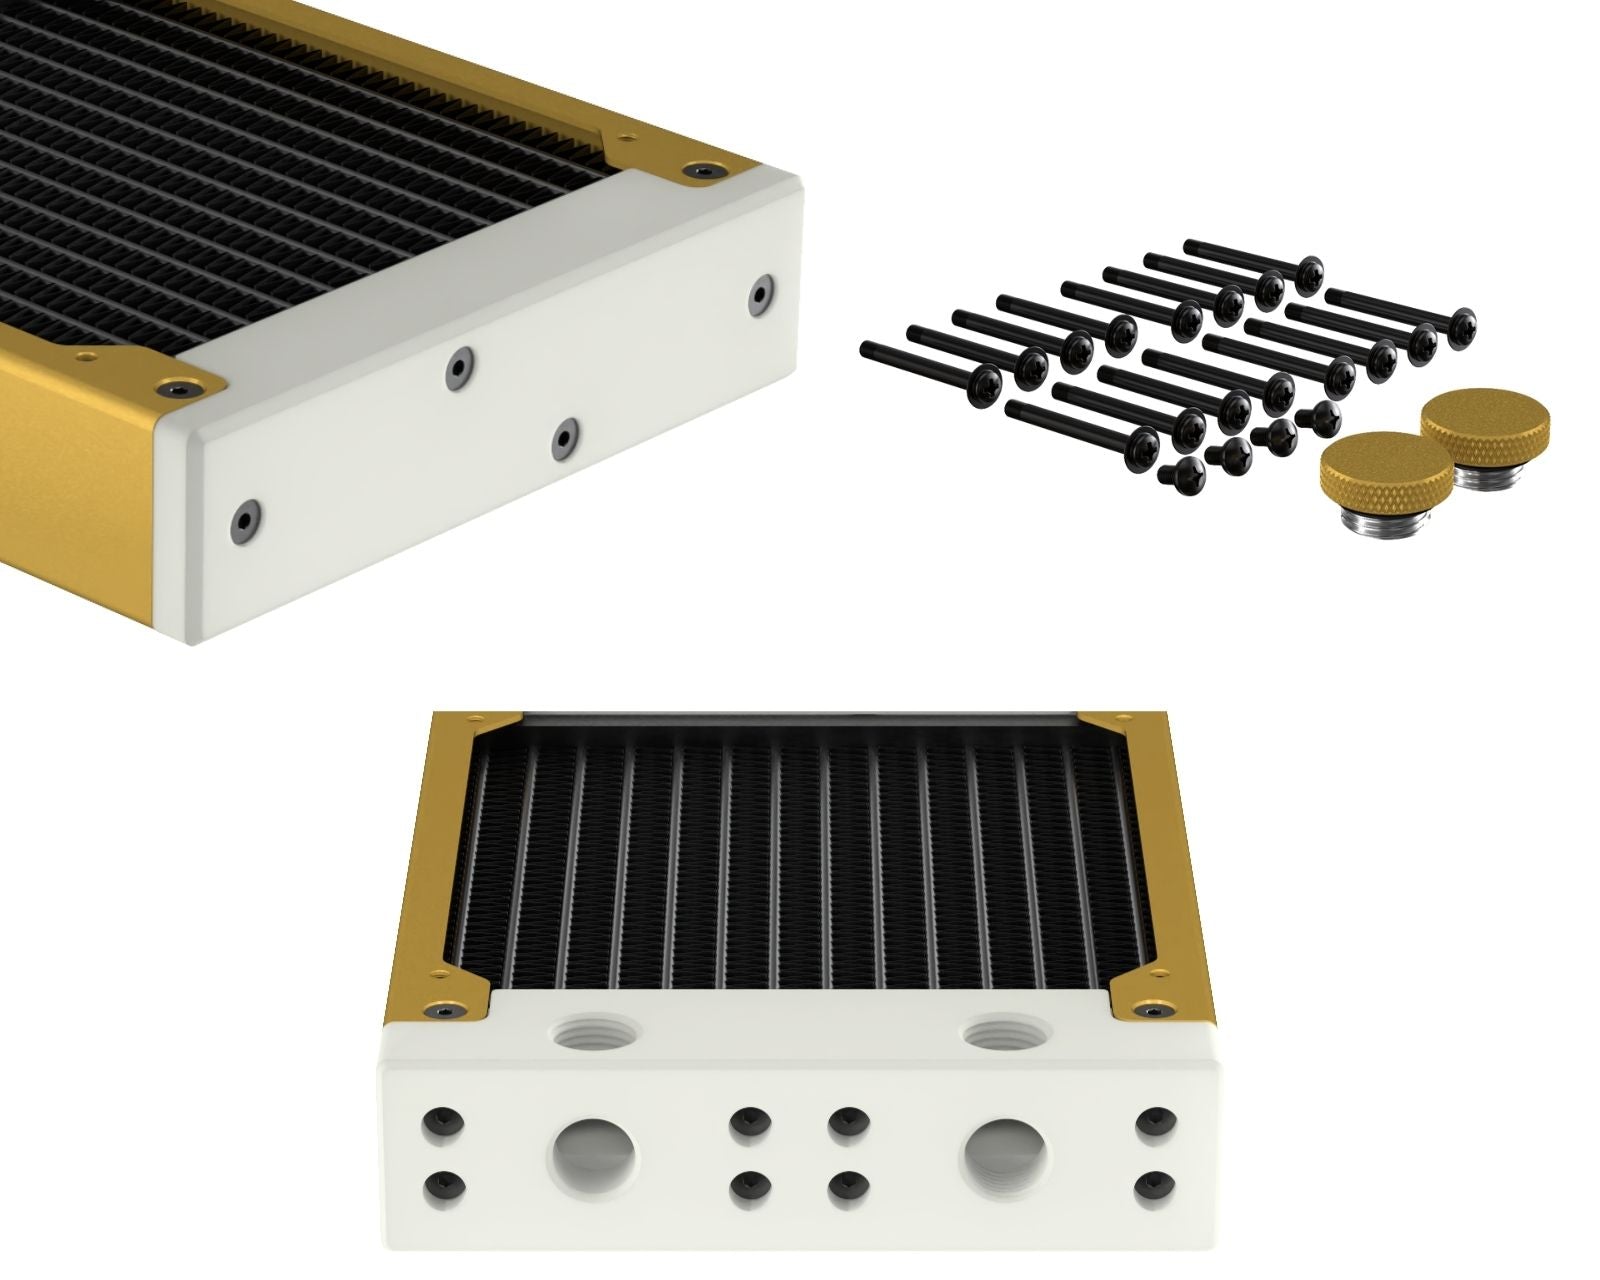 PrimoChill 480SL (30mm) EXIMO Modular Radiator, White POM, 4x120mm, Quad Fan (R-SL-W48) Available in 20+ Colors, Assembled in USA and Custom Watercooling Loop Ready - Gold